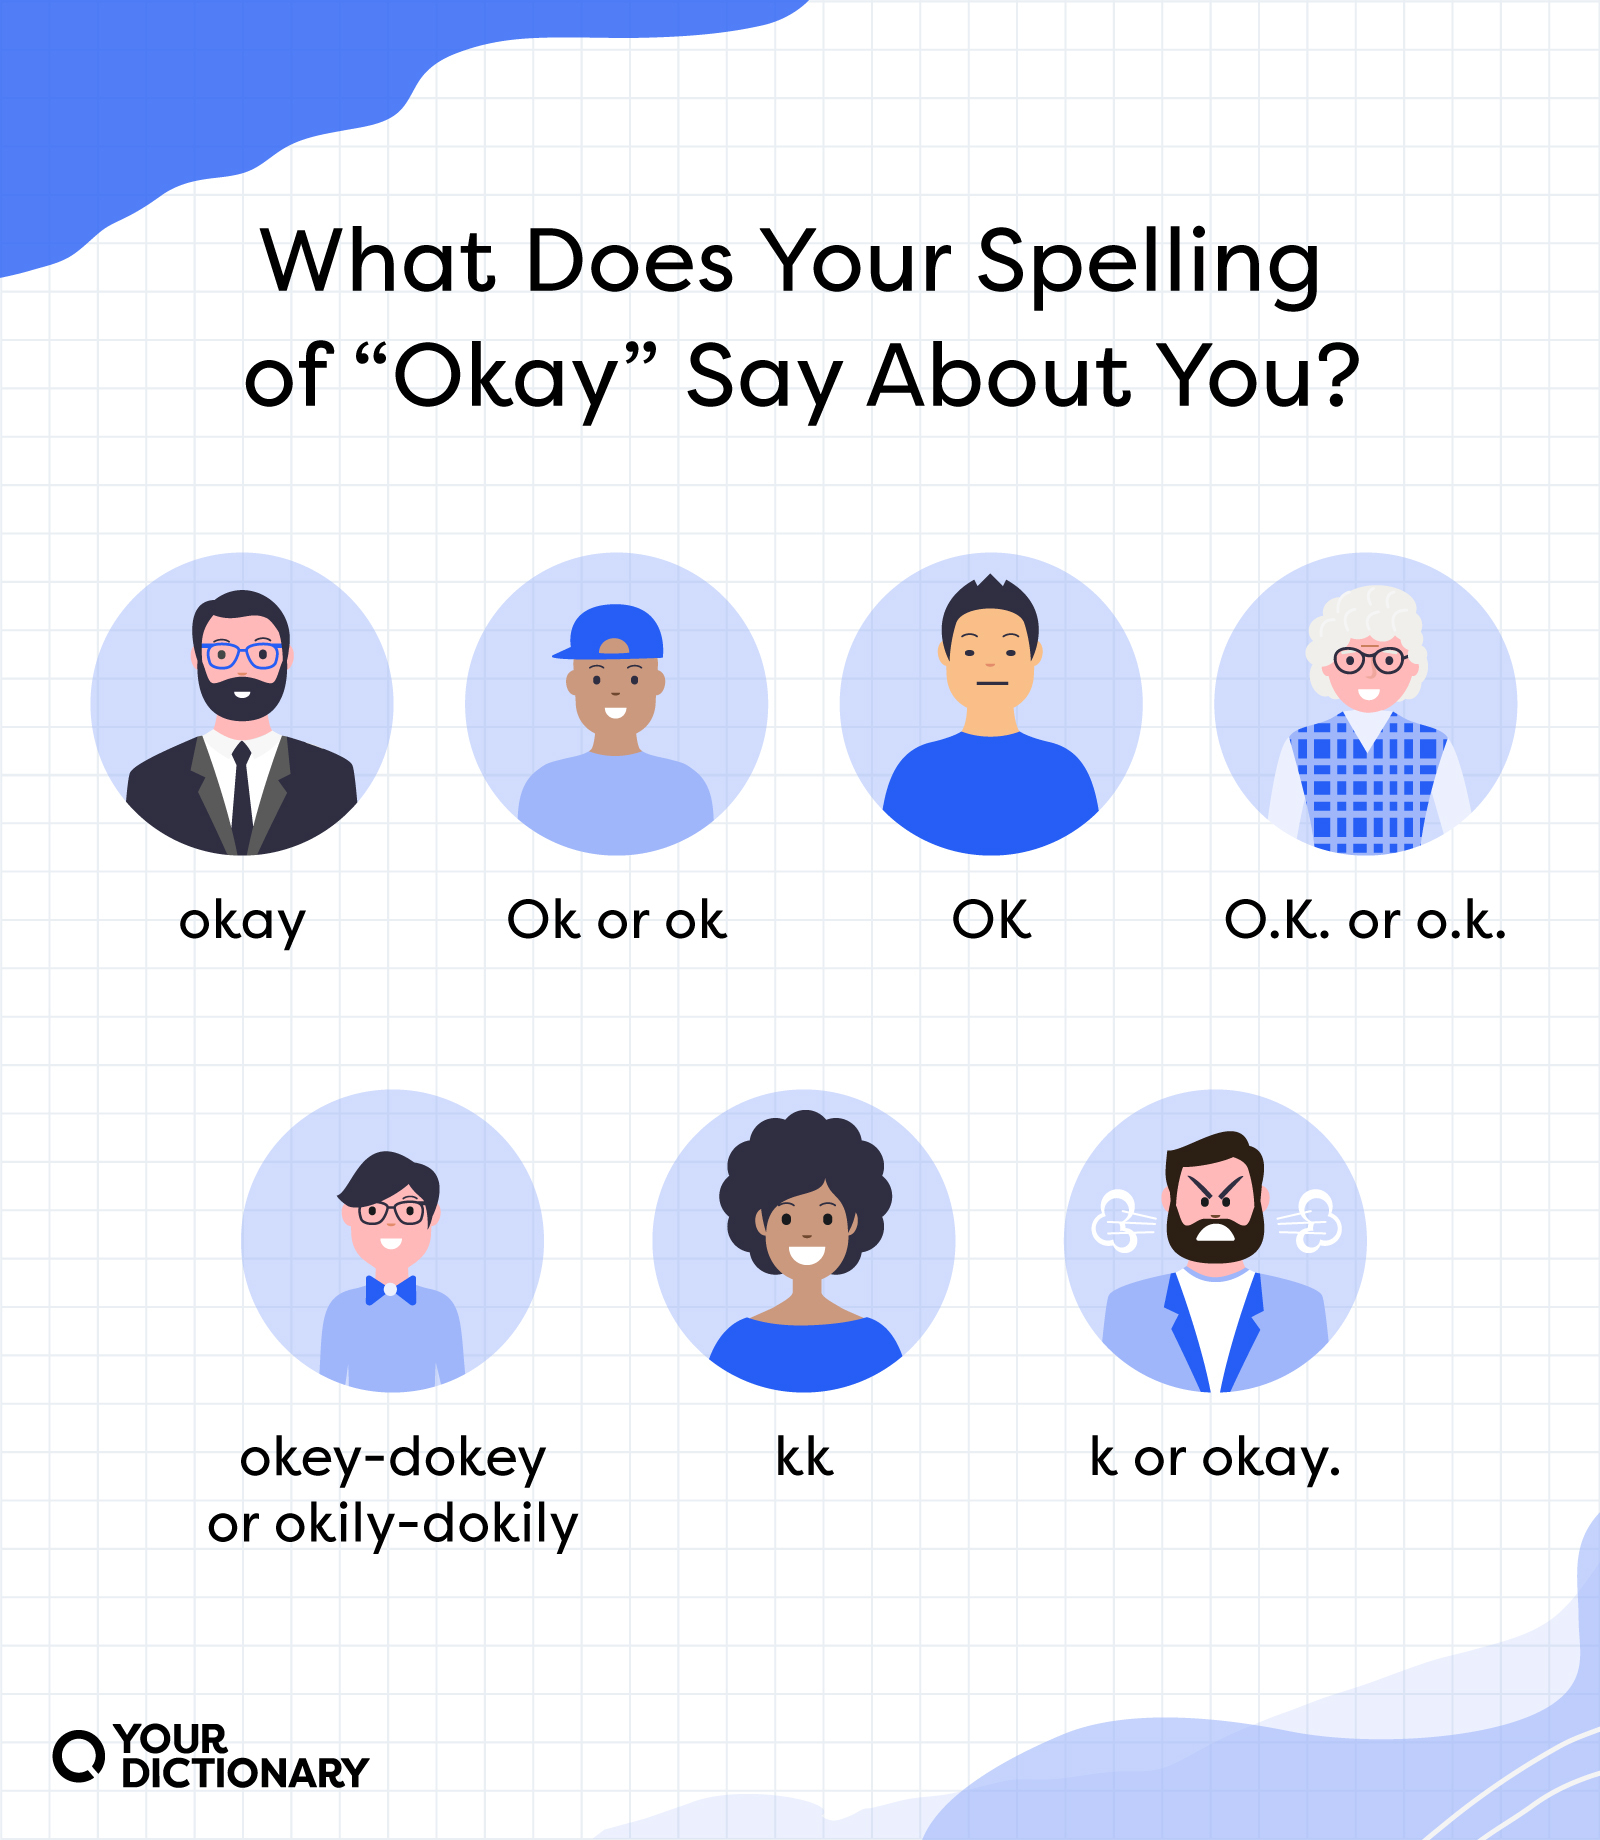 seven different ways to spell OK from the article with meanings